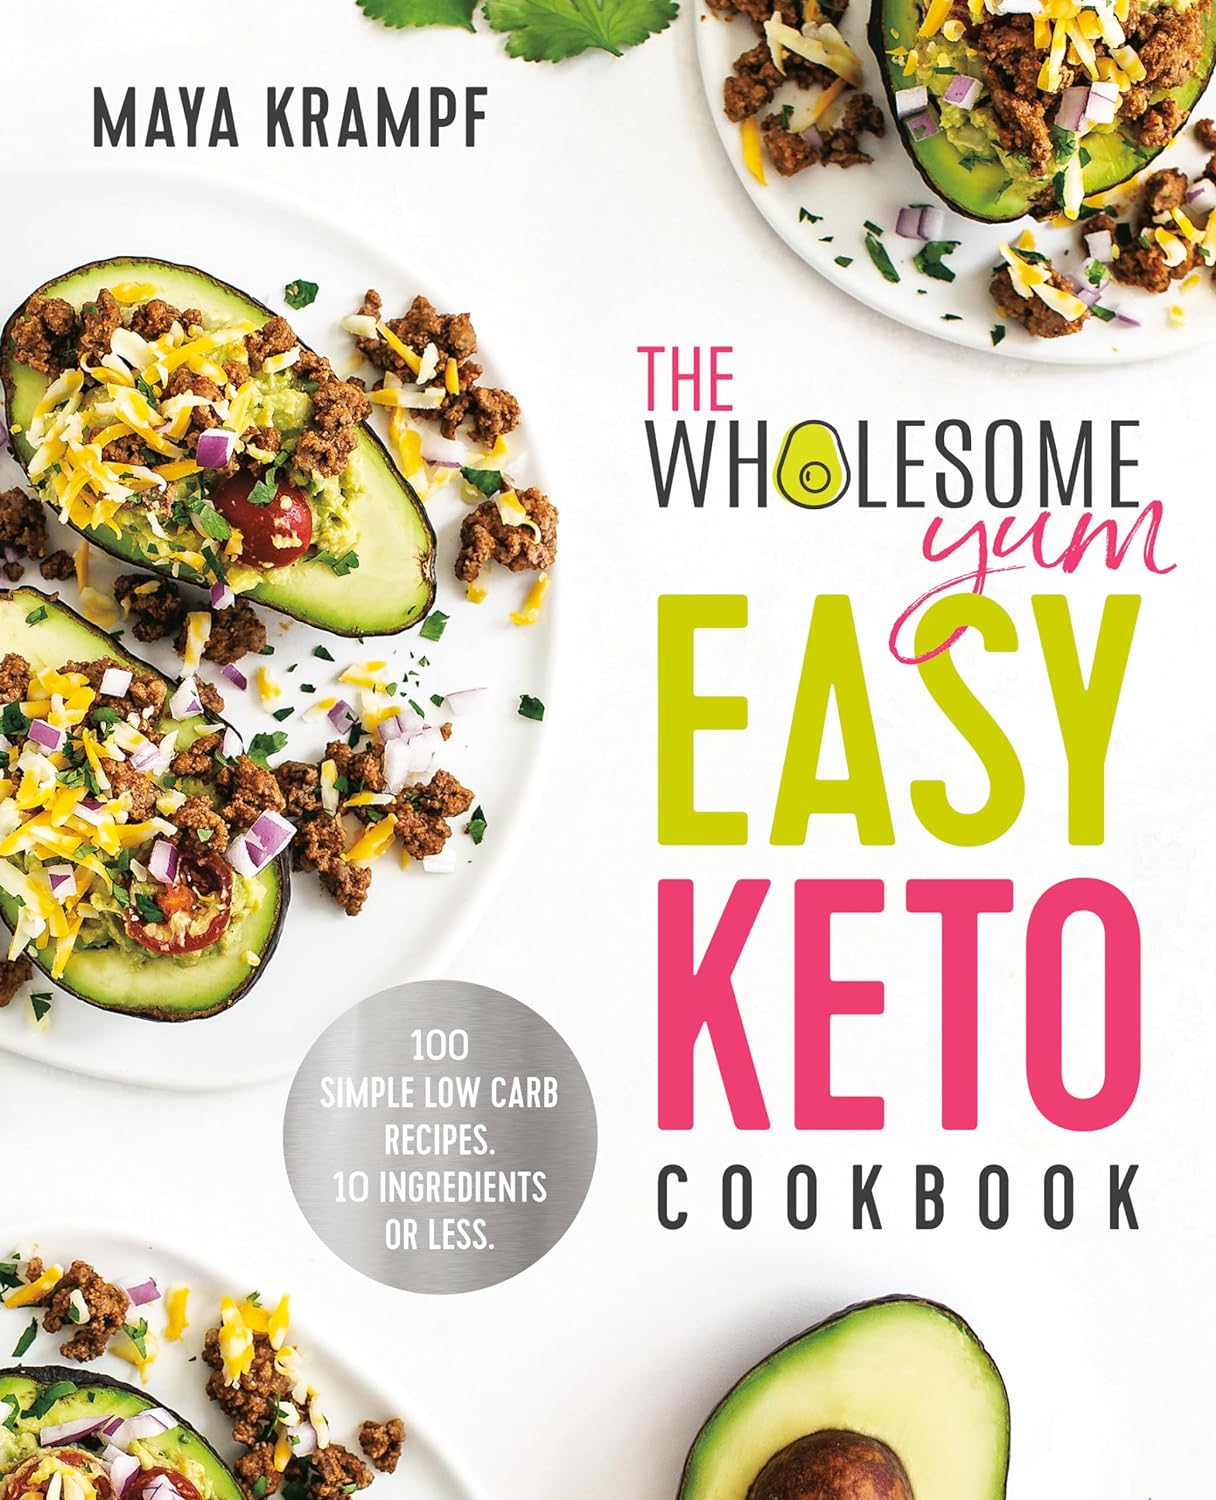 The Wholesome Yum Easy Keto Cookbook 100 Simple Low Carb Recipes By Maya Krumpf